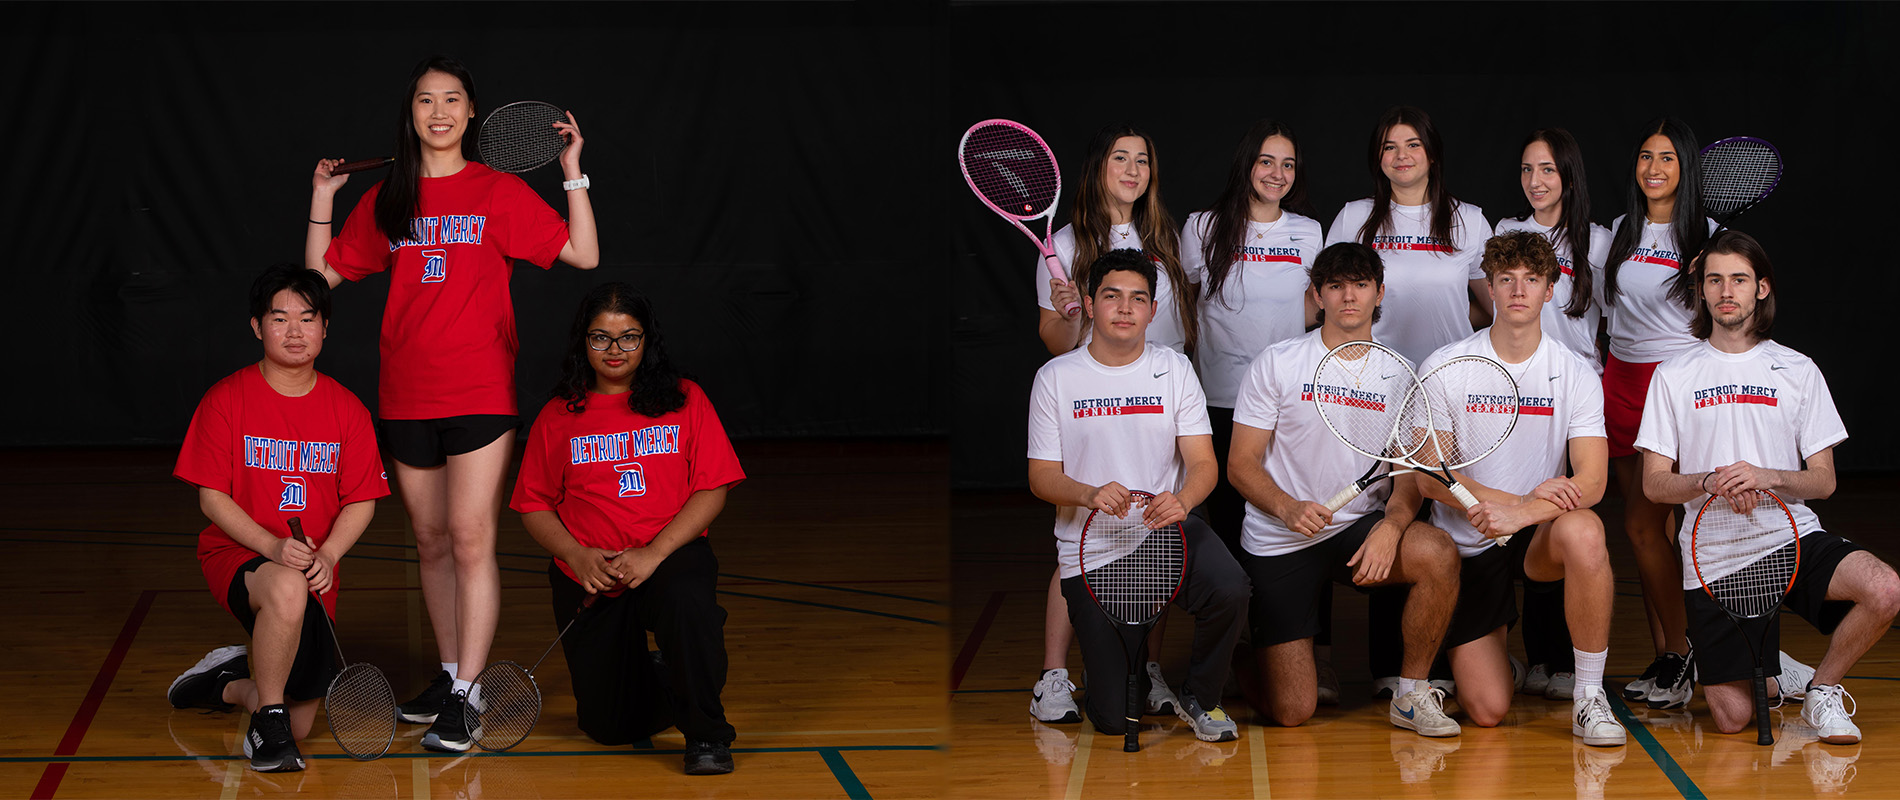 Members of the badminton and tennis club teams at University of Detroit Mercy hold their rackets as they pose for team photos inside a darkened Student Fitness Center.